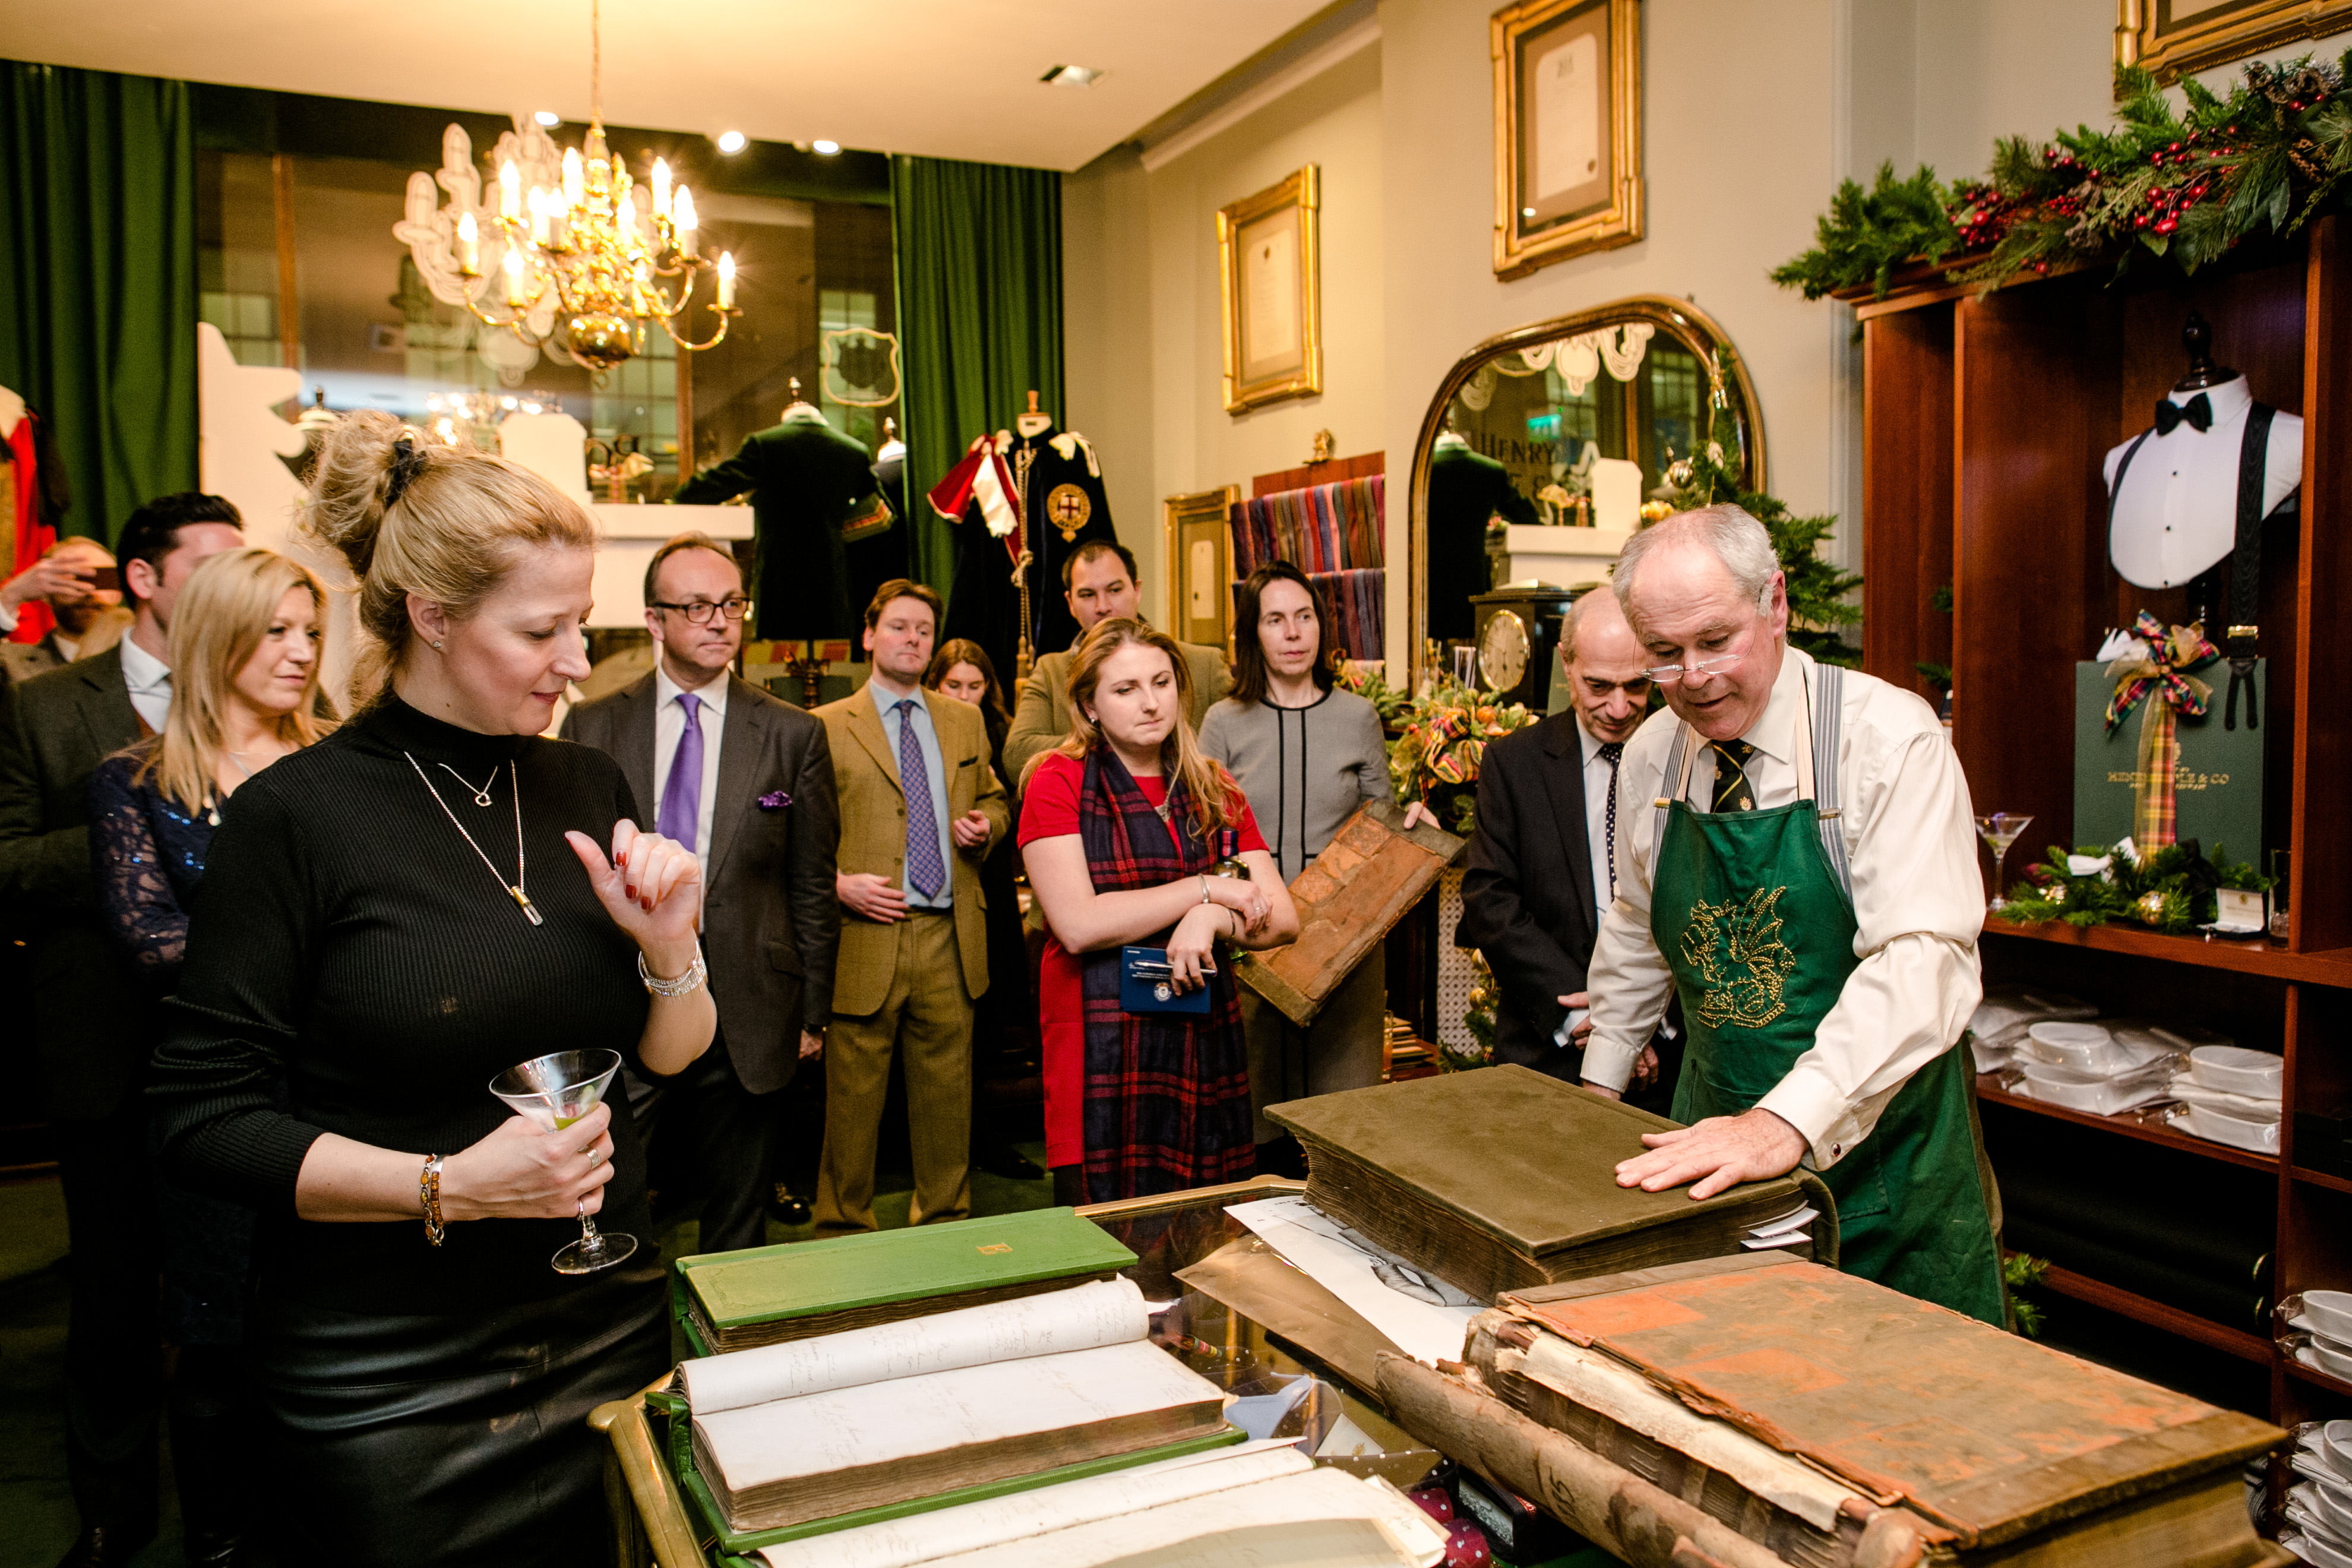 Mark Winstanley from the The Wyvern Bindery